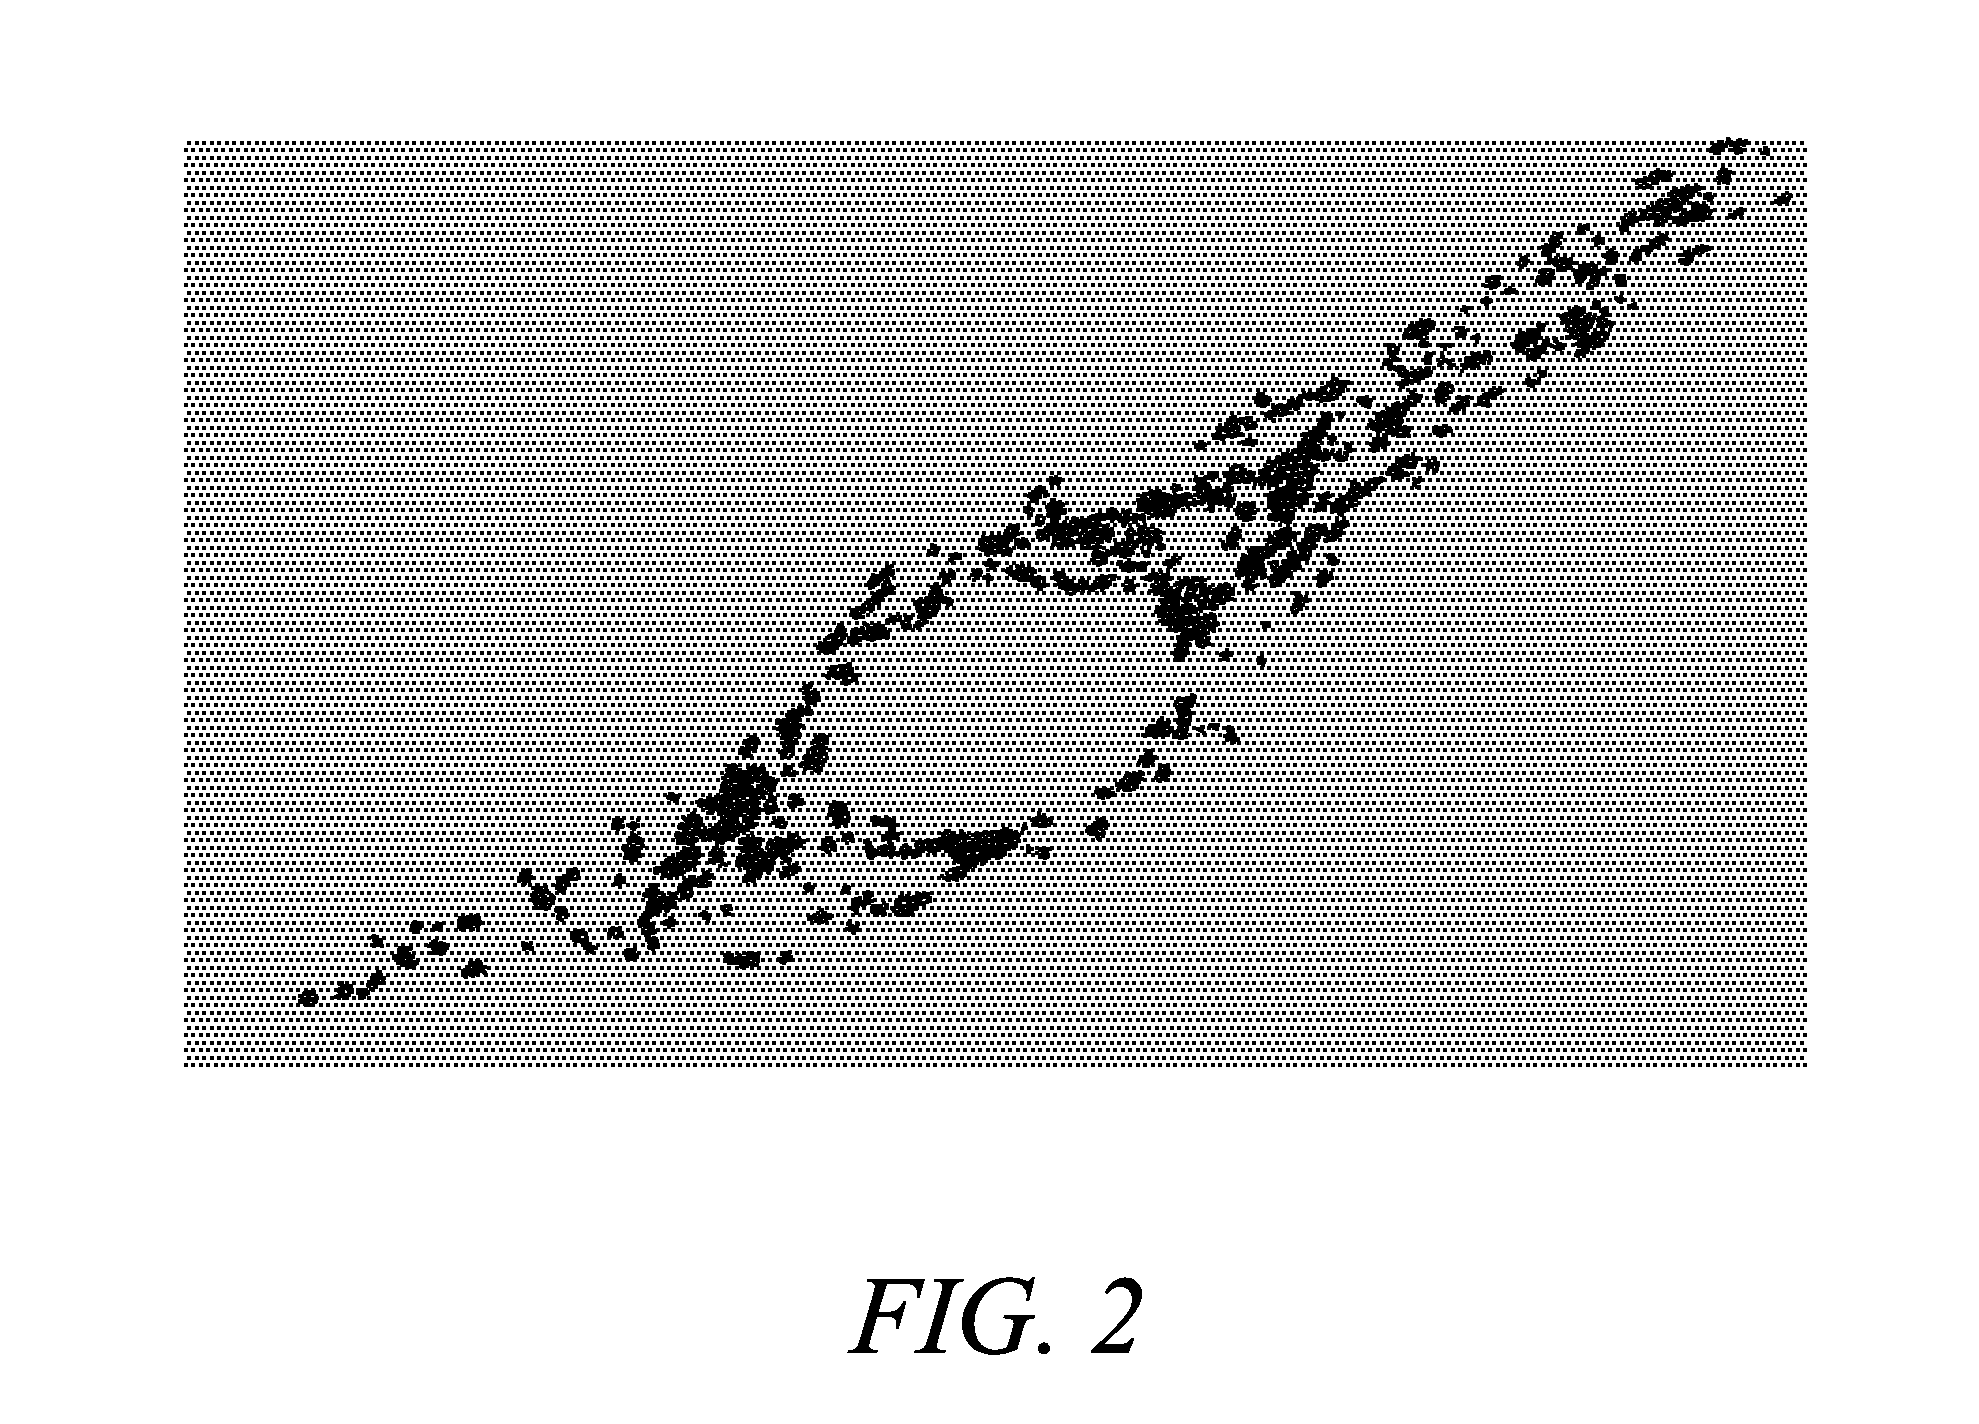 Zinc binding compounds and their method of use